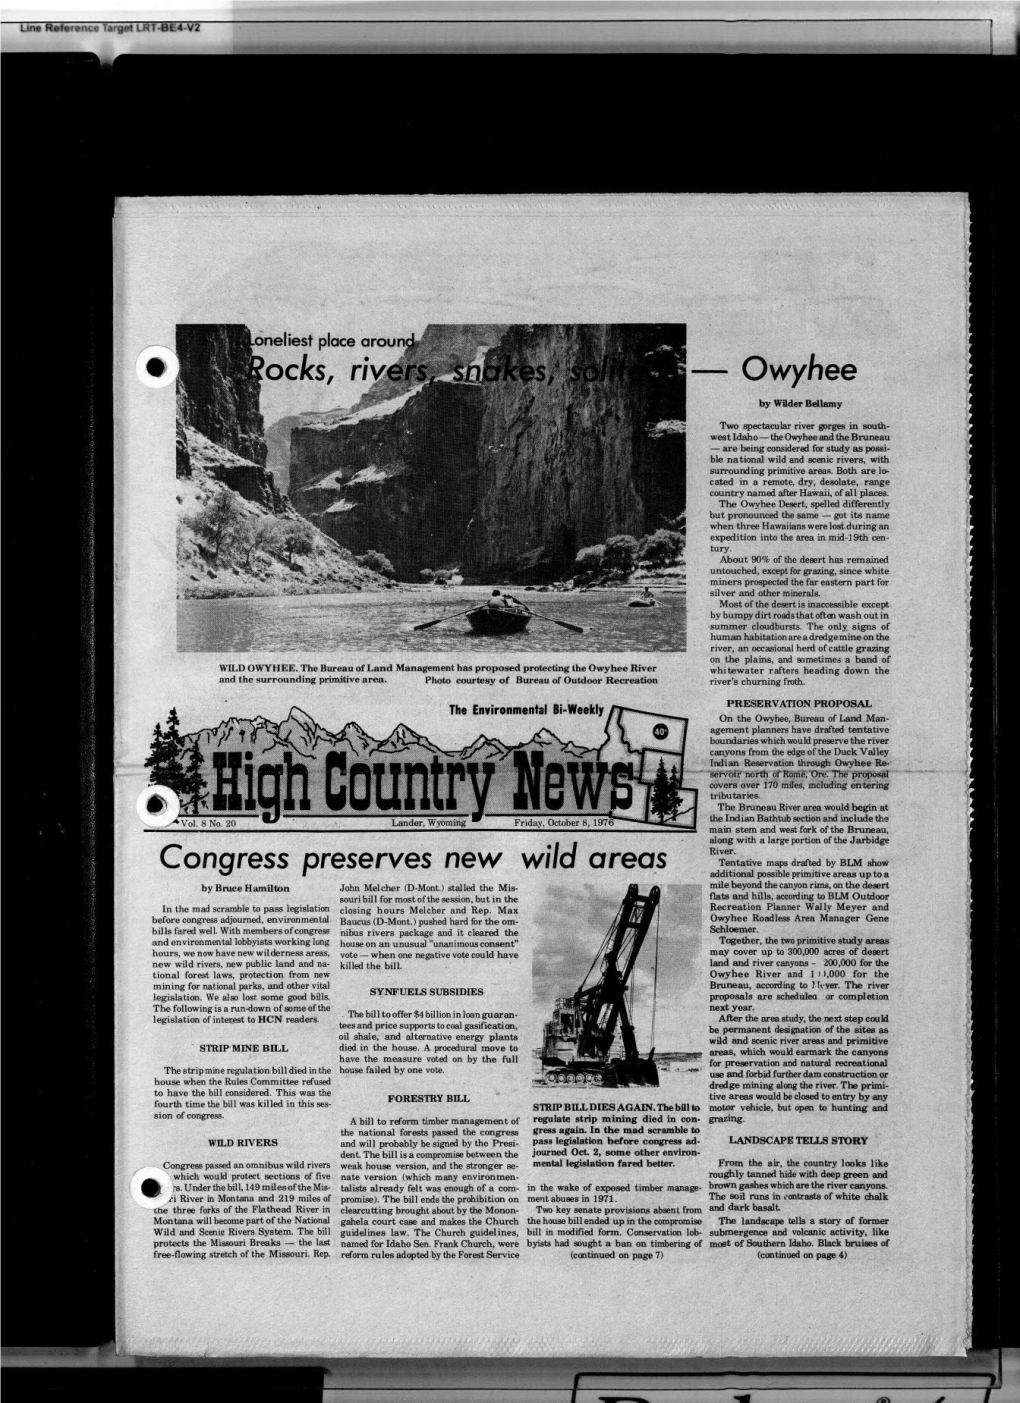 High Country News Vol. 8.20, Oct. 8, 1976